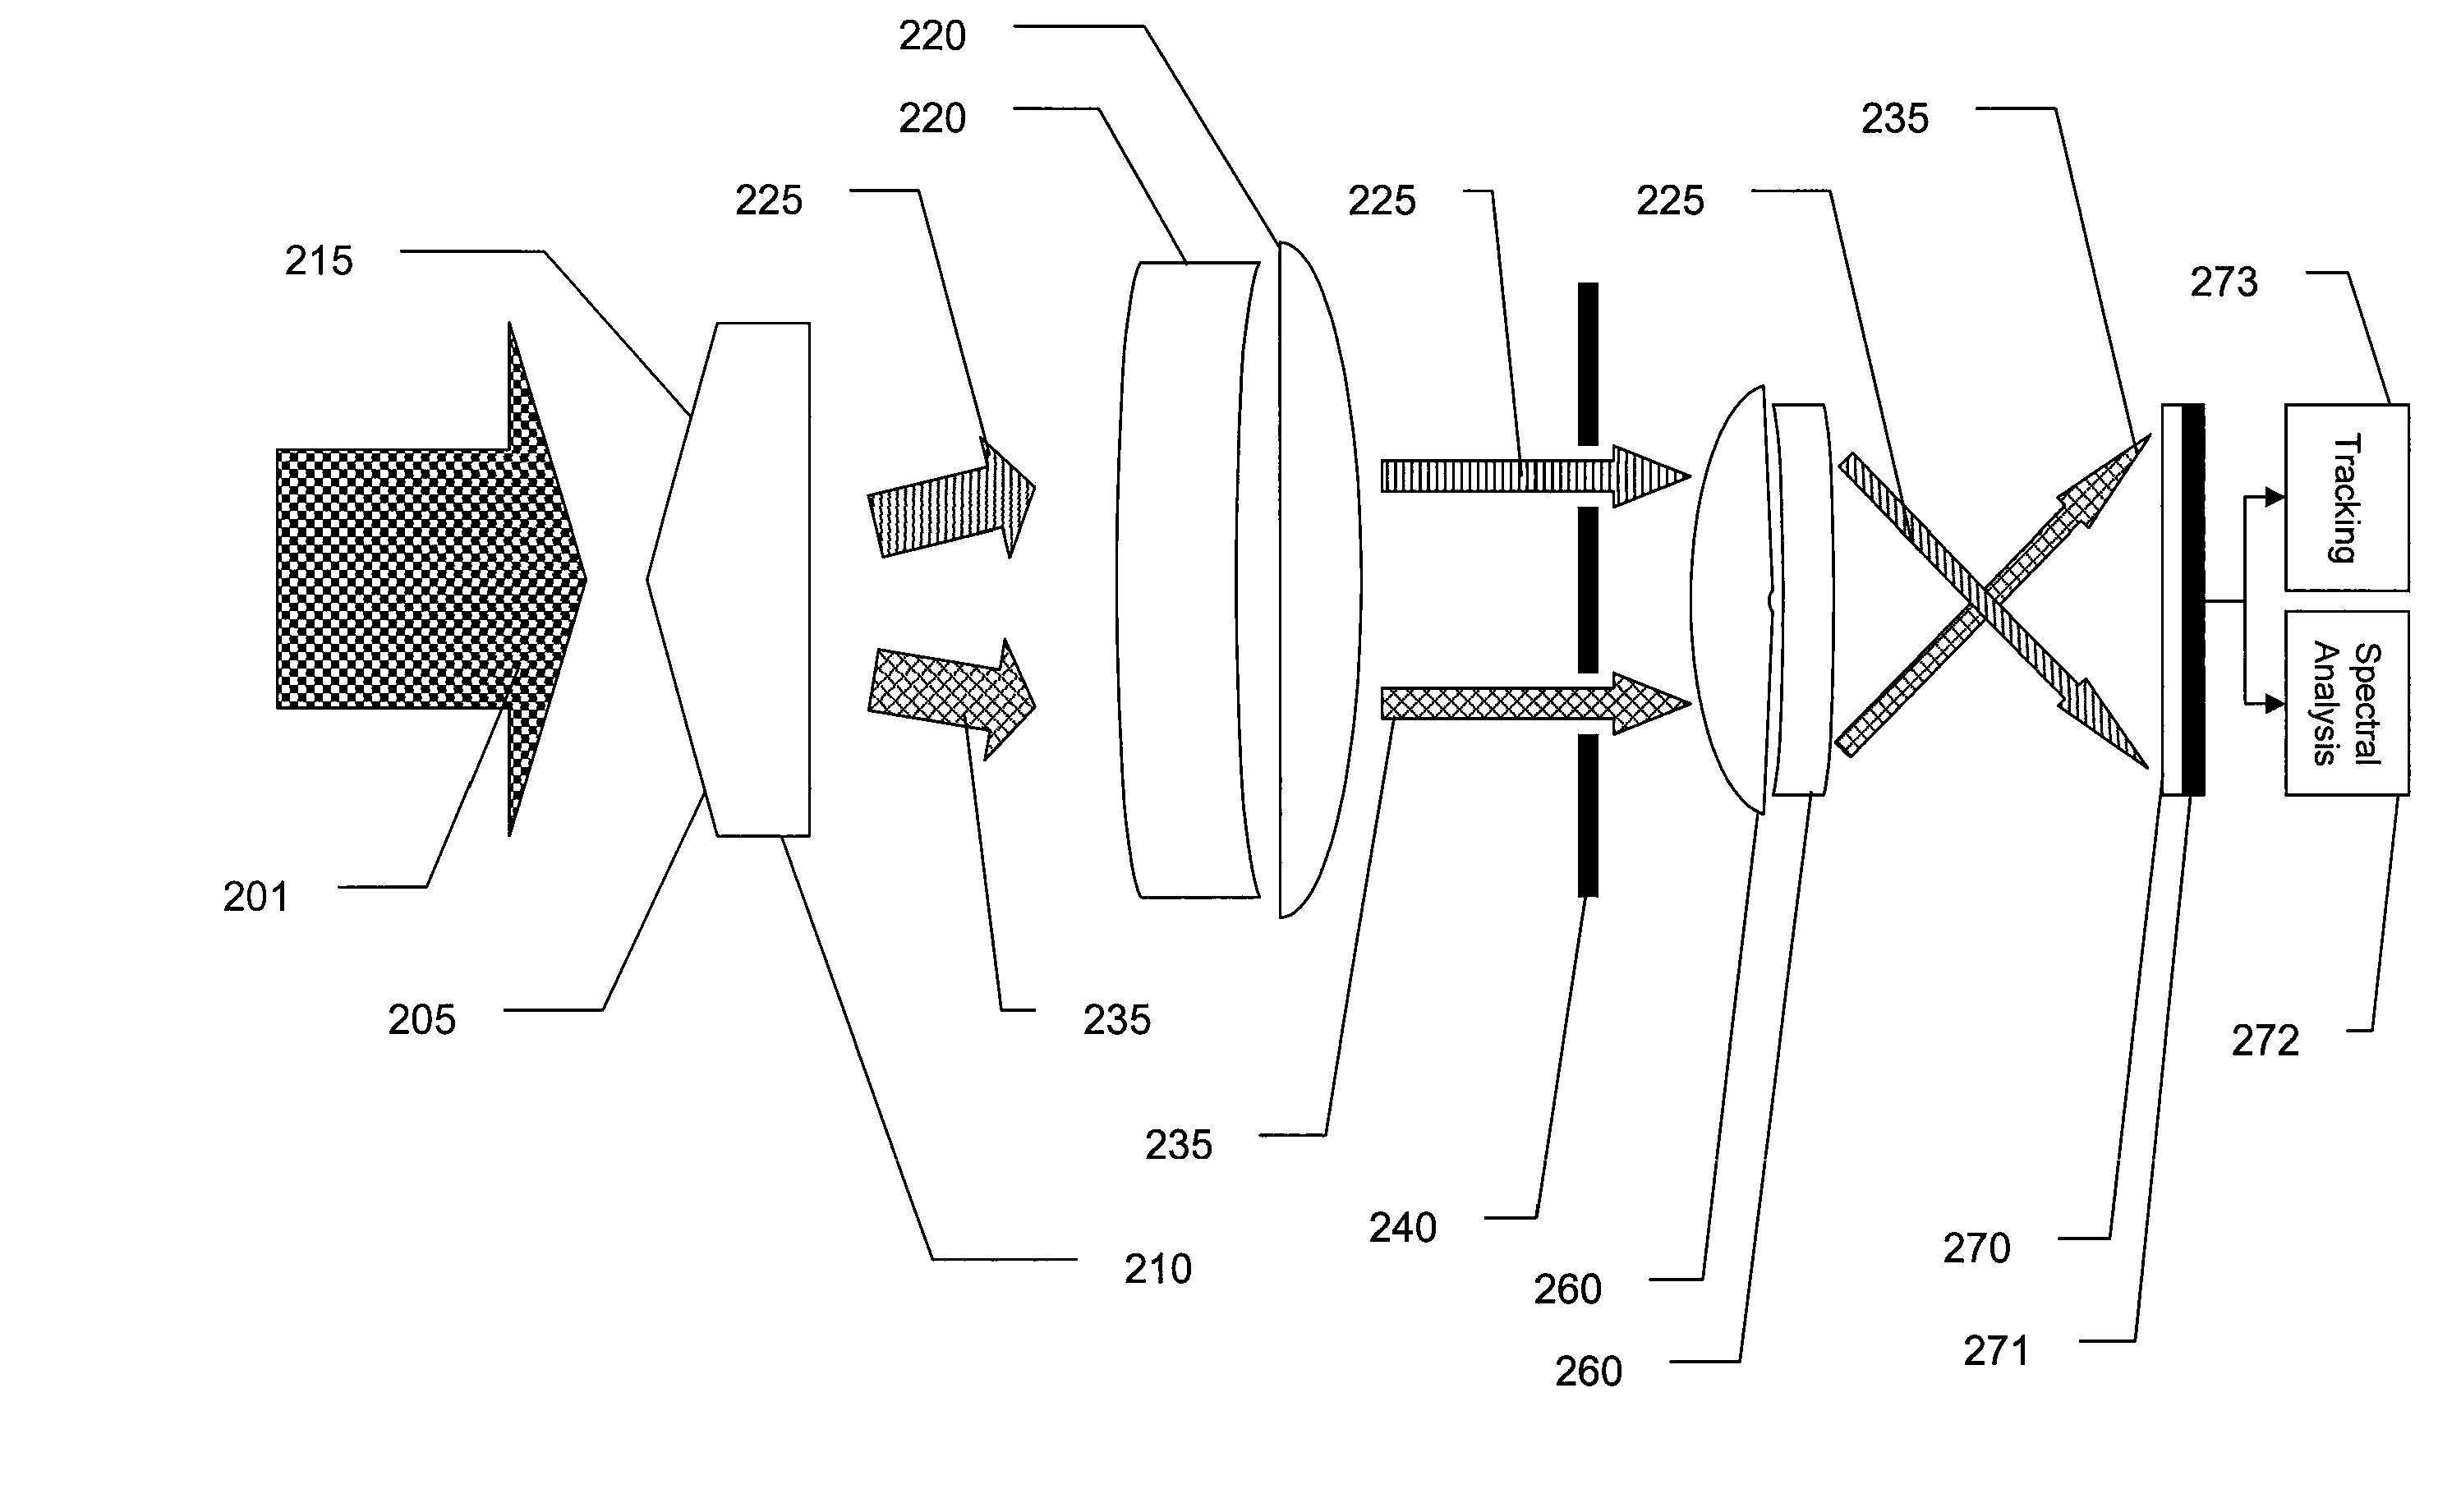 System and Method For Analysis of Image Data